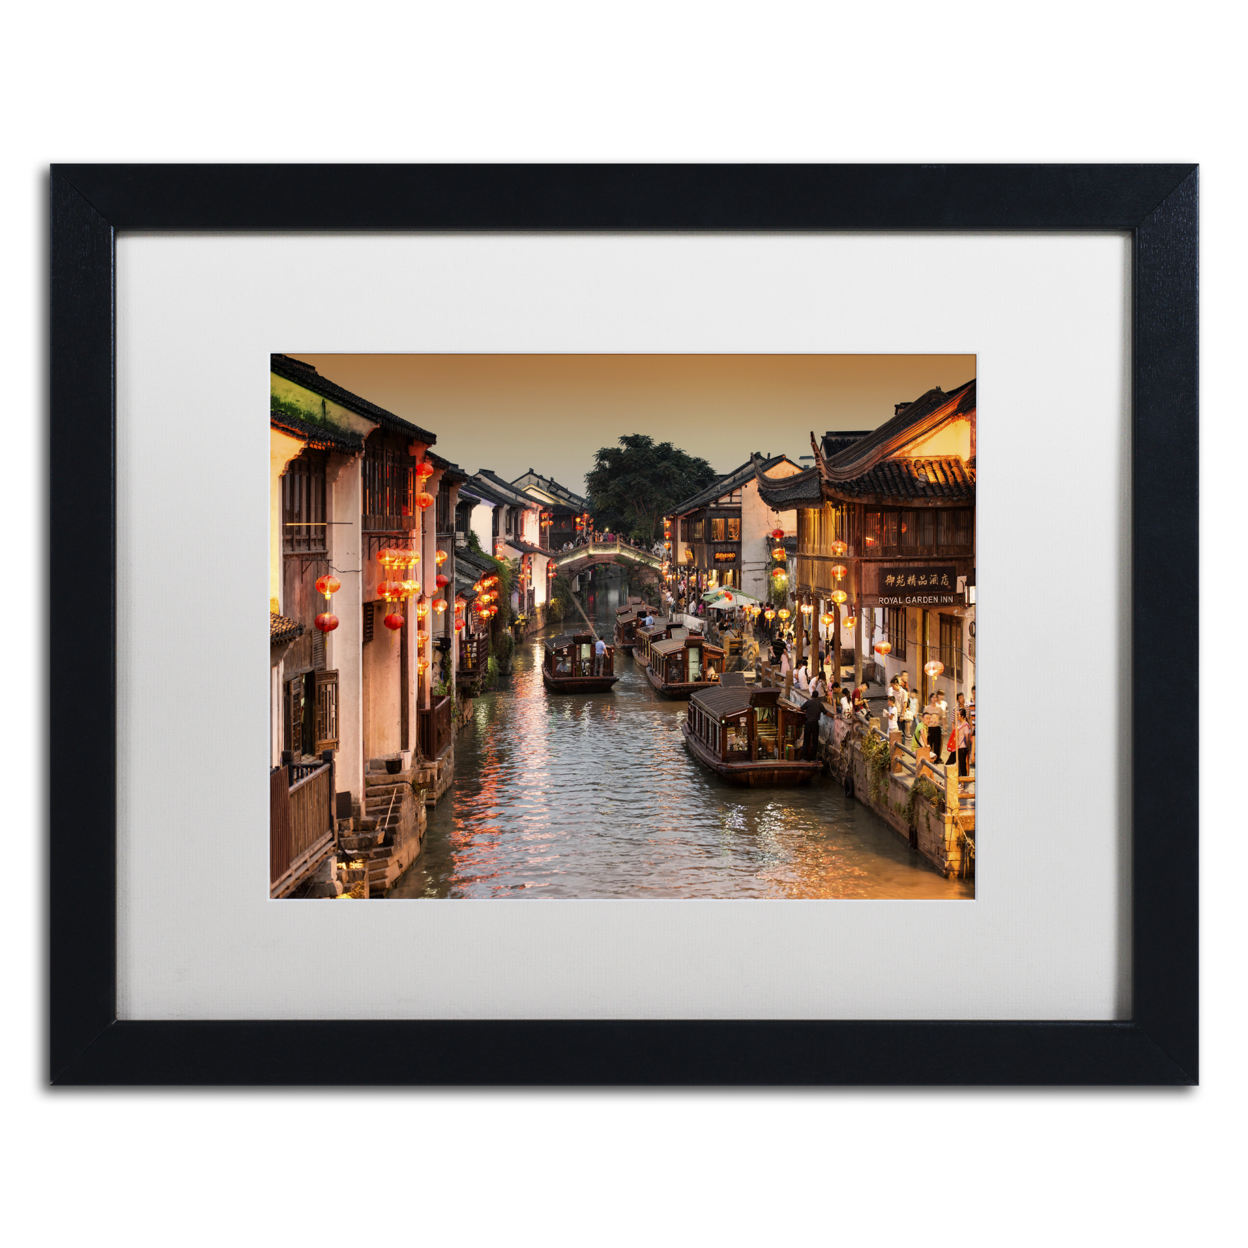 Philippe Hugonnard 'Water Town' Black Wooden Framed Art 18 X 22 Inches